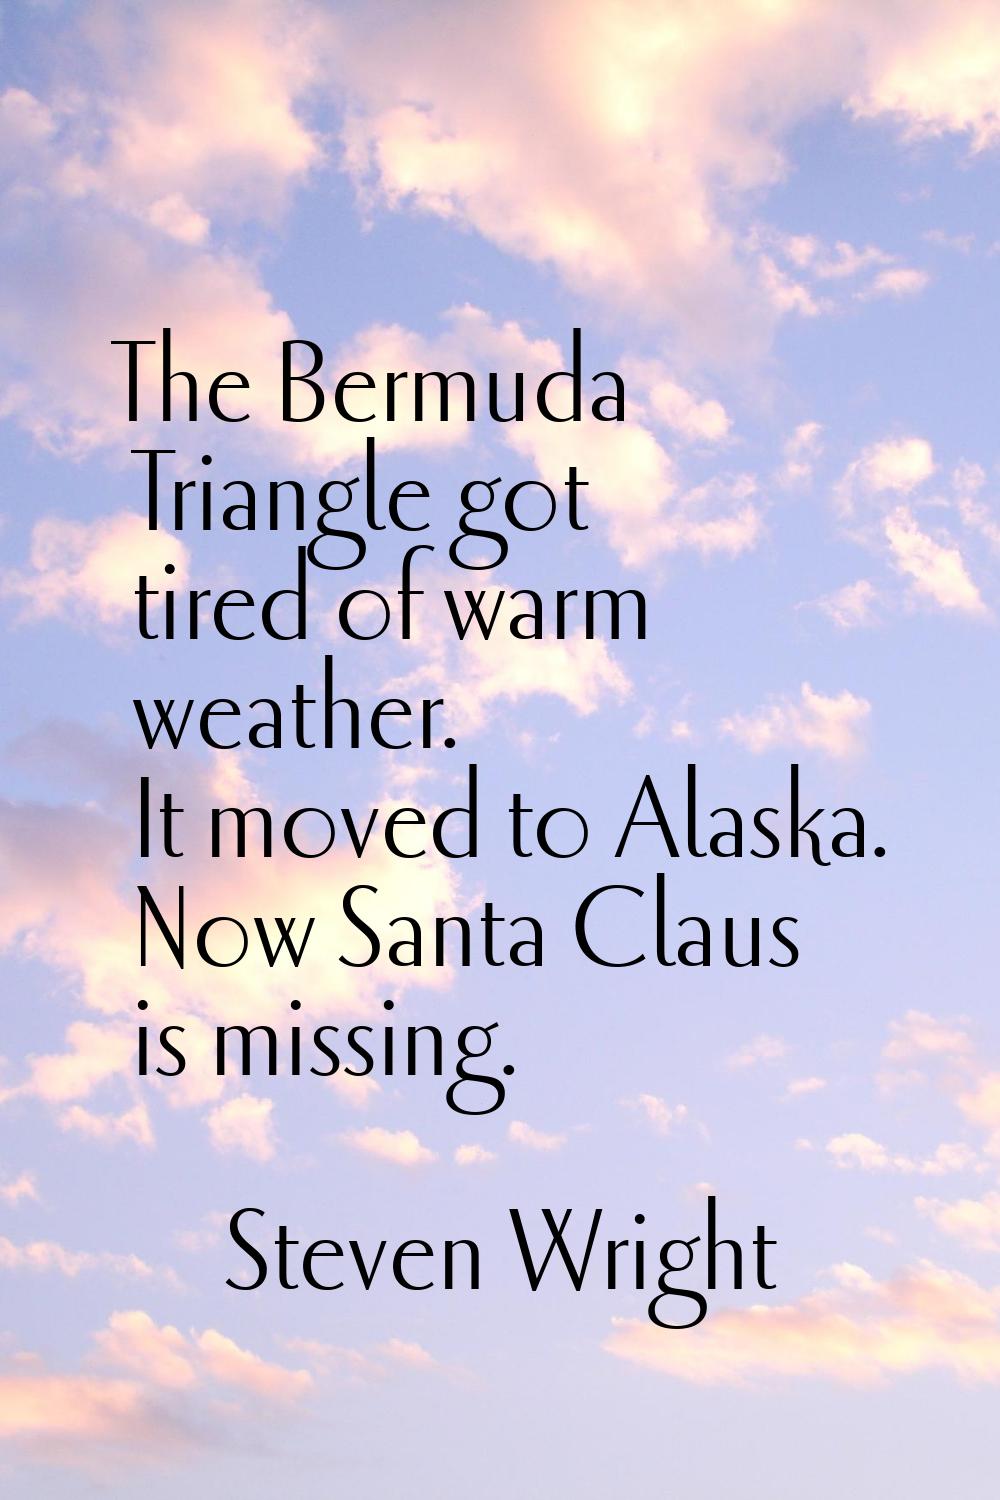 The Bermuda Triangle got tired of warm weather. It moved to Alaska. Now Santa Claus is missing.